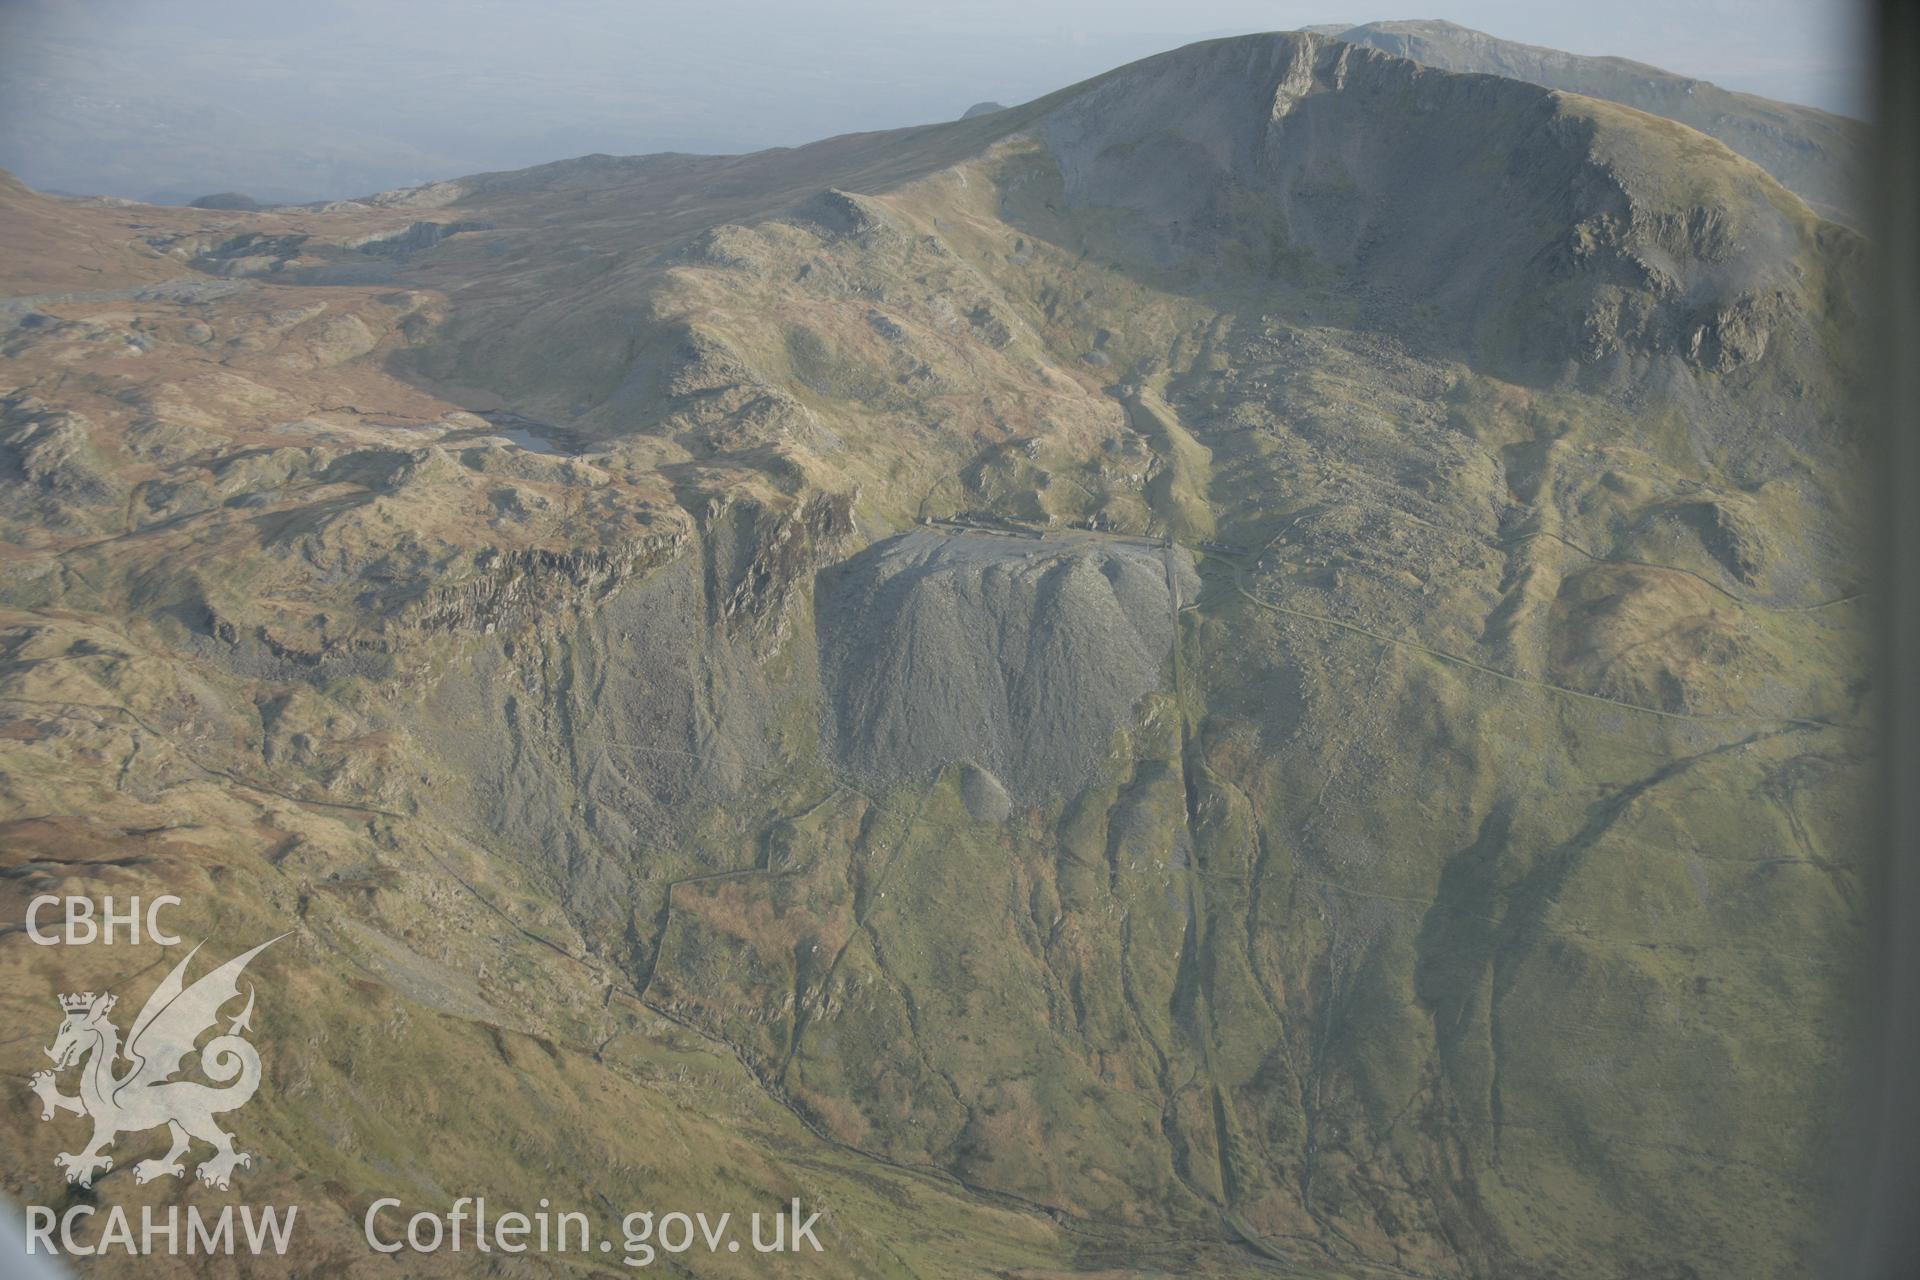 RCAHMW digital colour oblique photograph of Croesor Slate Quarry from the north. Taken on 20/03/2005 by T.G. Driver.